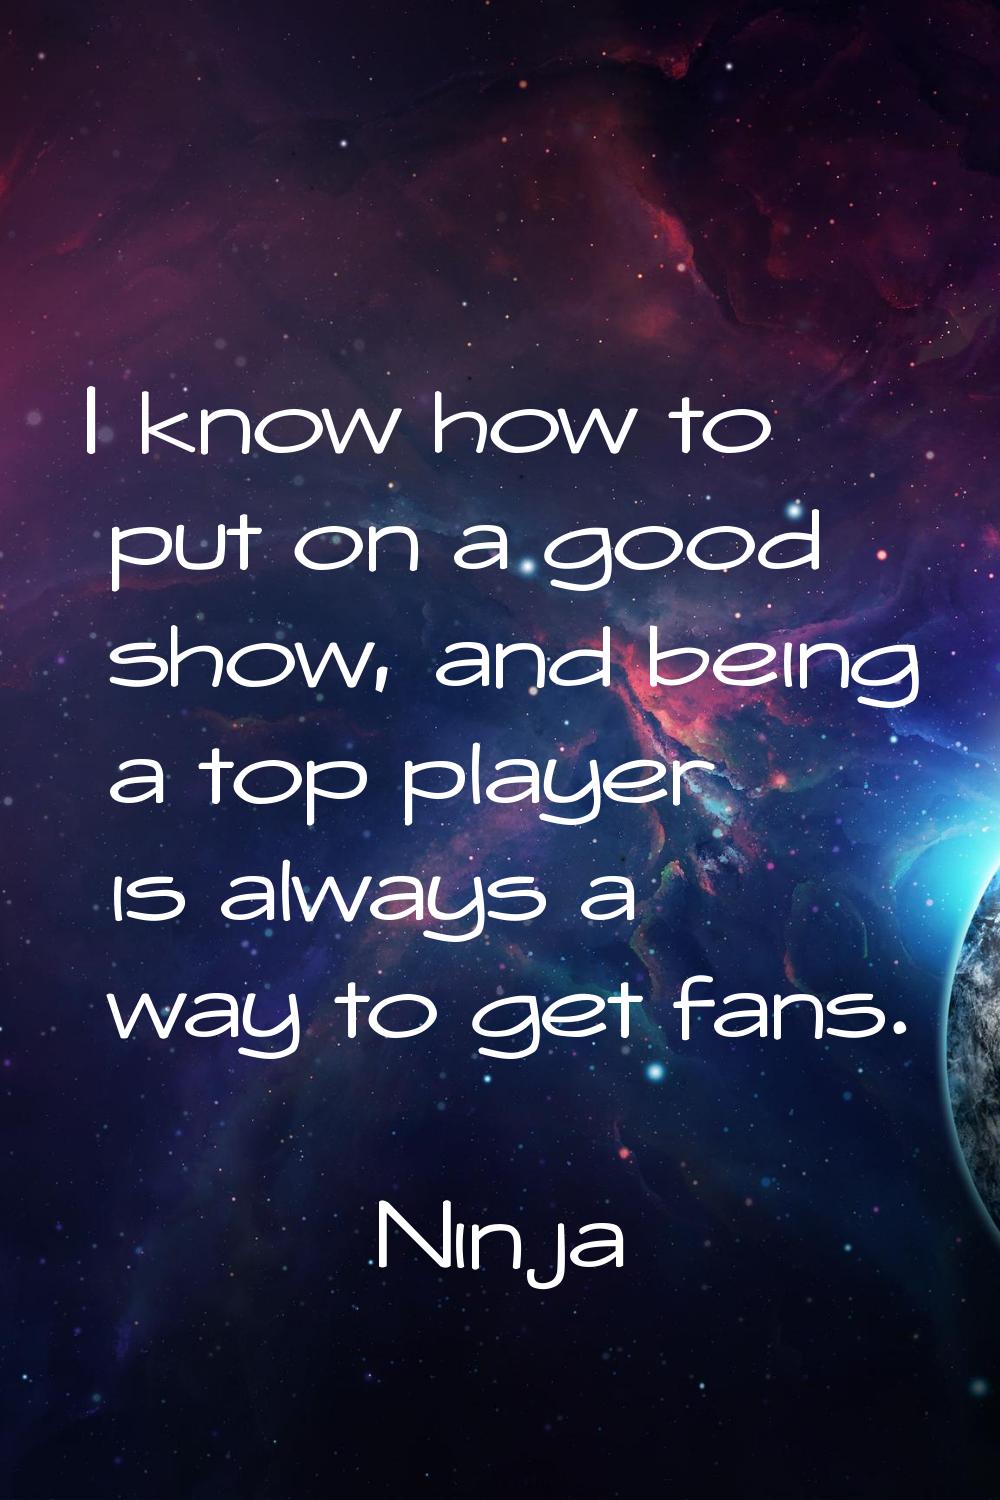 I know how to put on a good show, and being a top player is always a way to get fans.